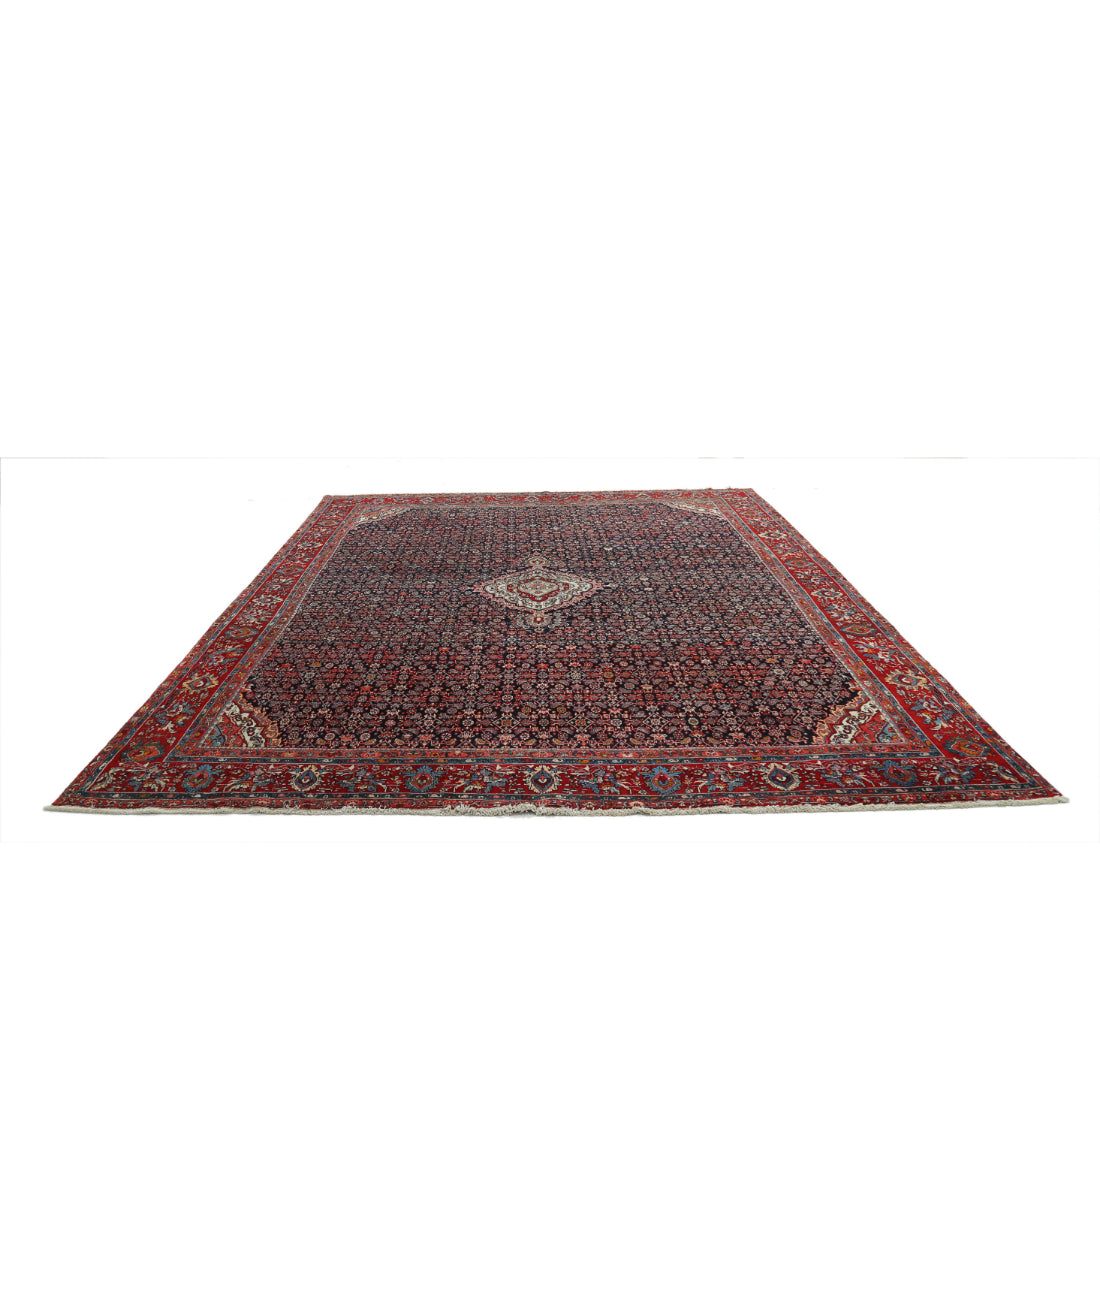 Hand Knotted Antique Persian Bijar Wool Rug - 10'0'' x 12'4'' 10'0'' x 12'4'' (300 X 370) / Blue / Red